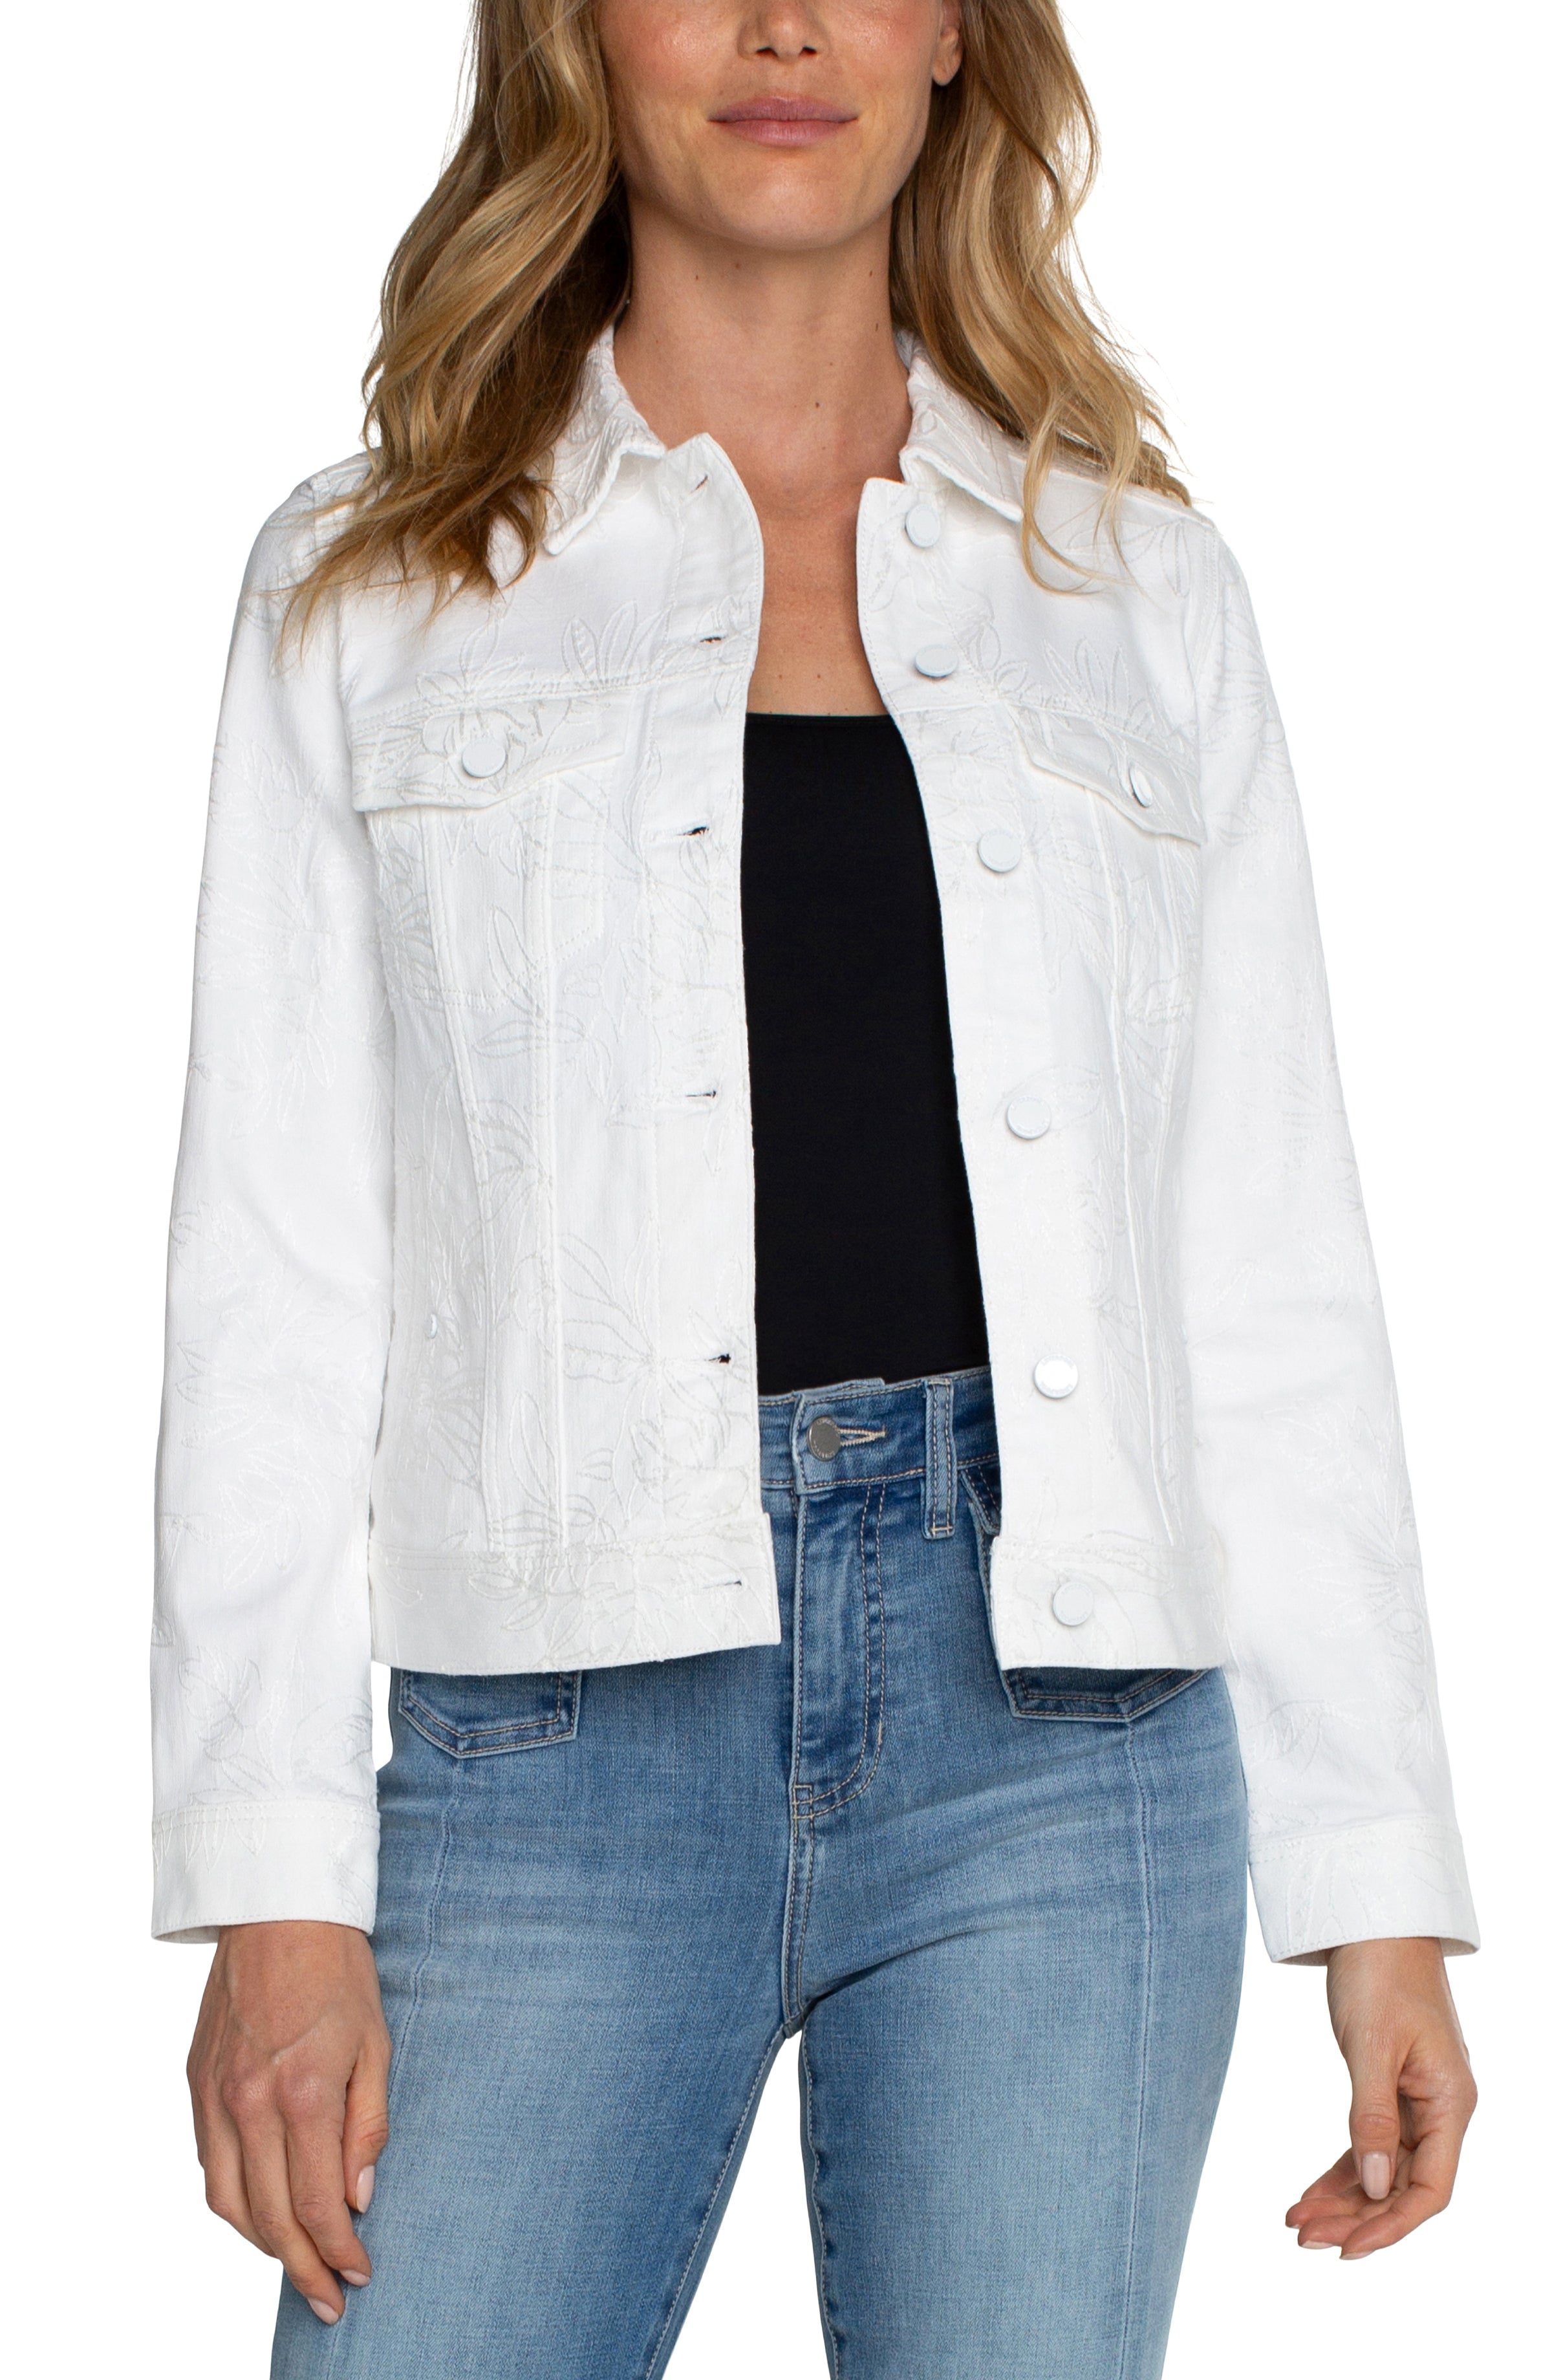 LVP Jean Jacket - Bright White Floral Front View